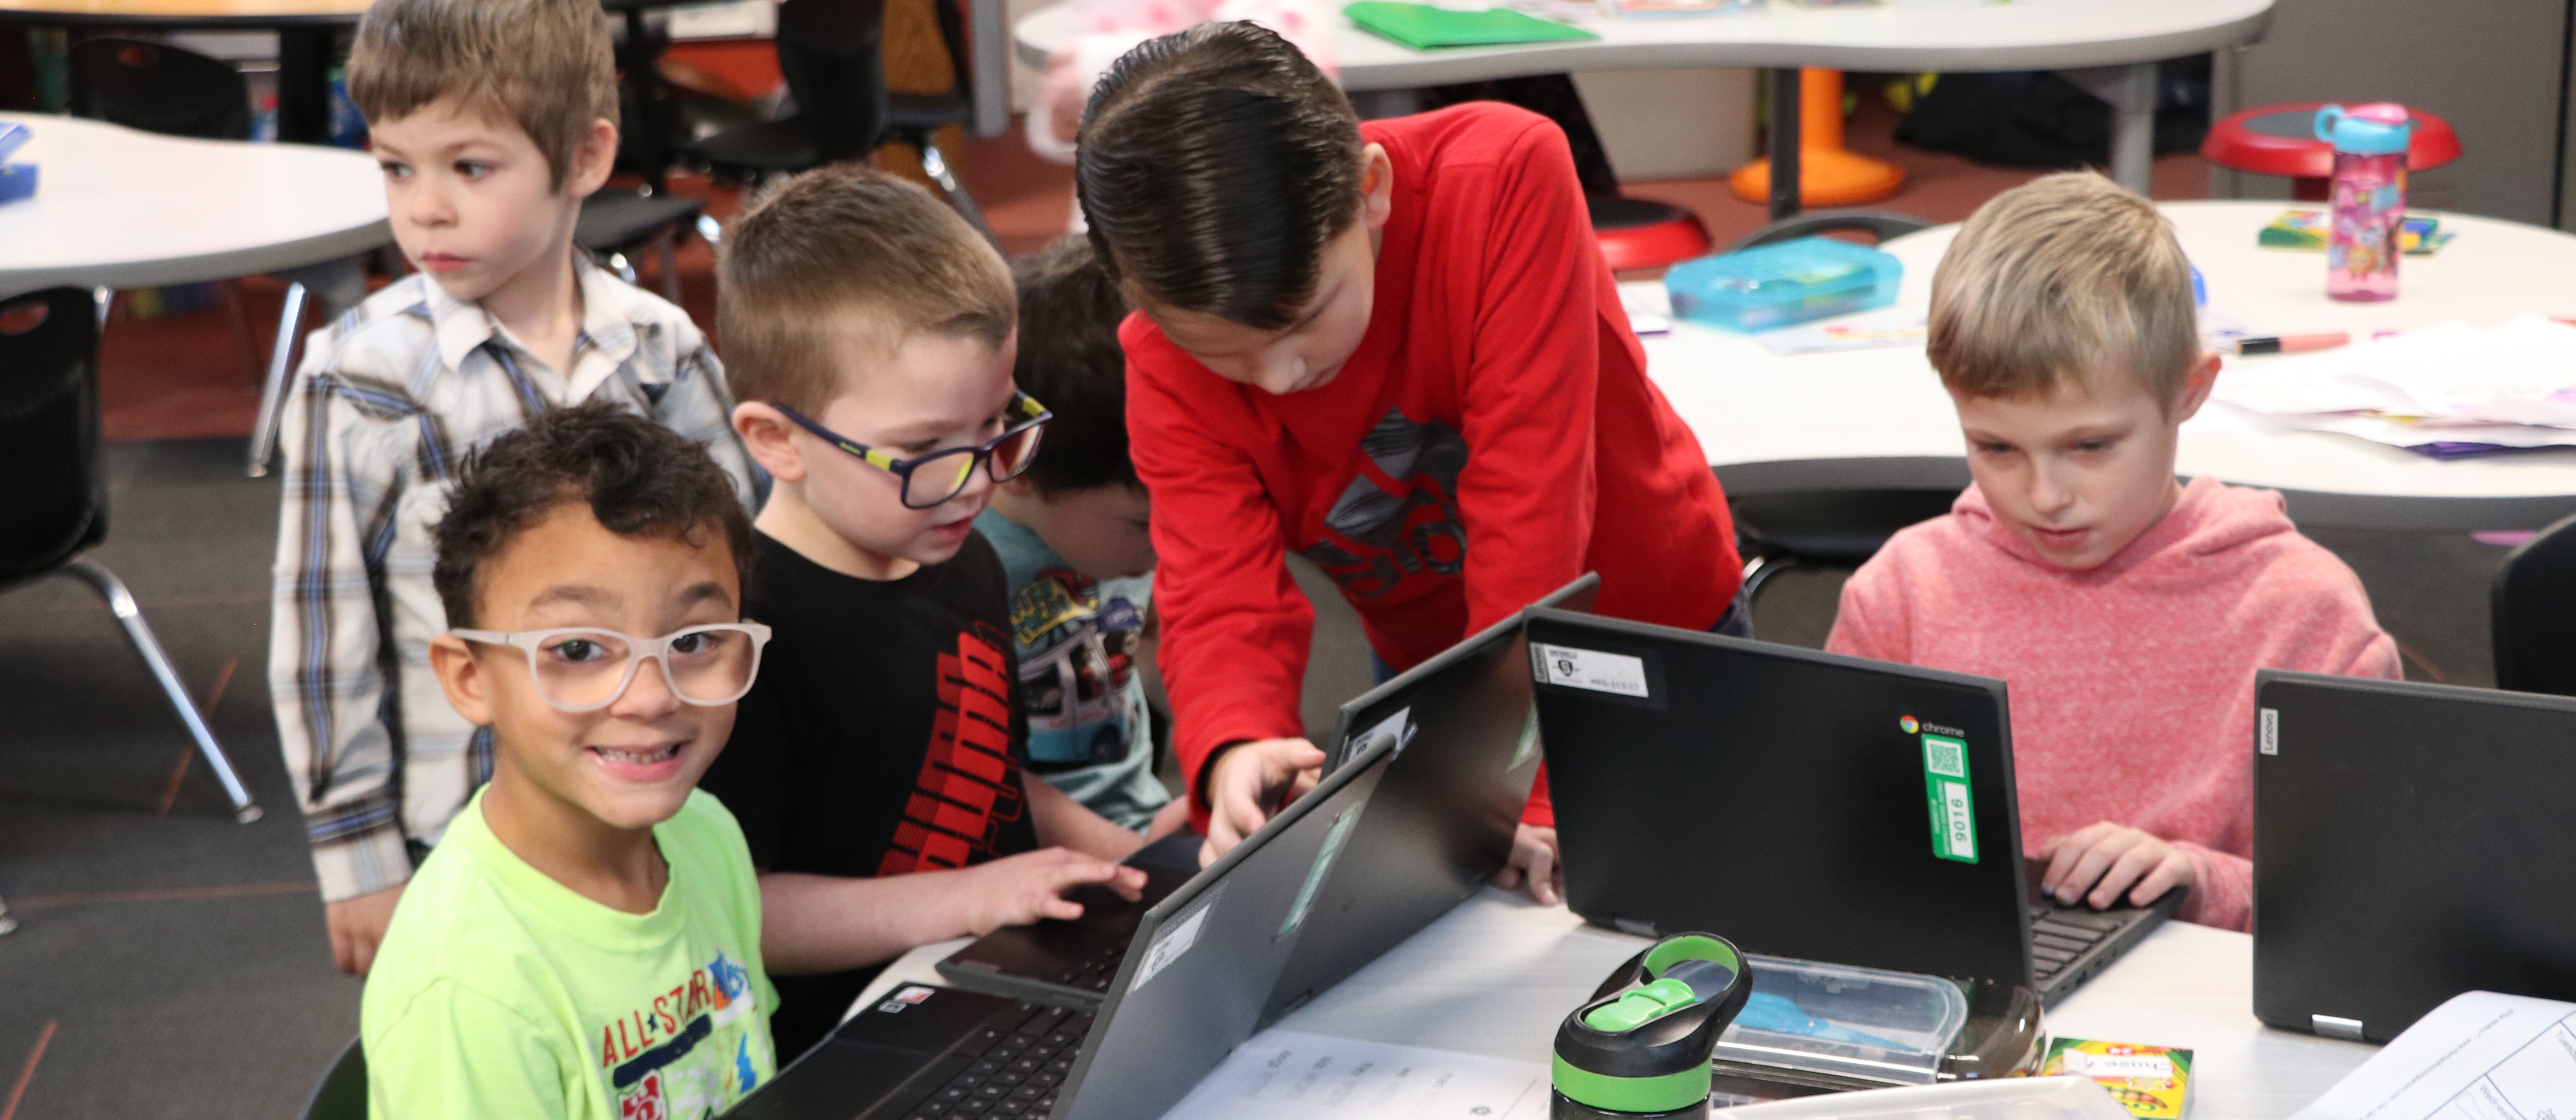 Boy smiles at camera while other boys look at a computer